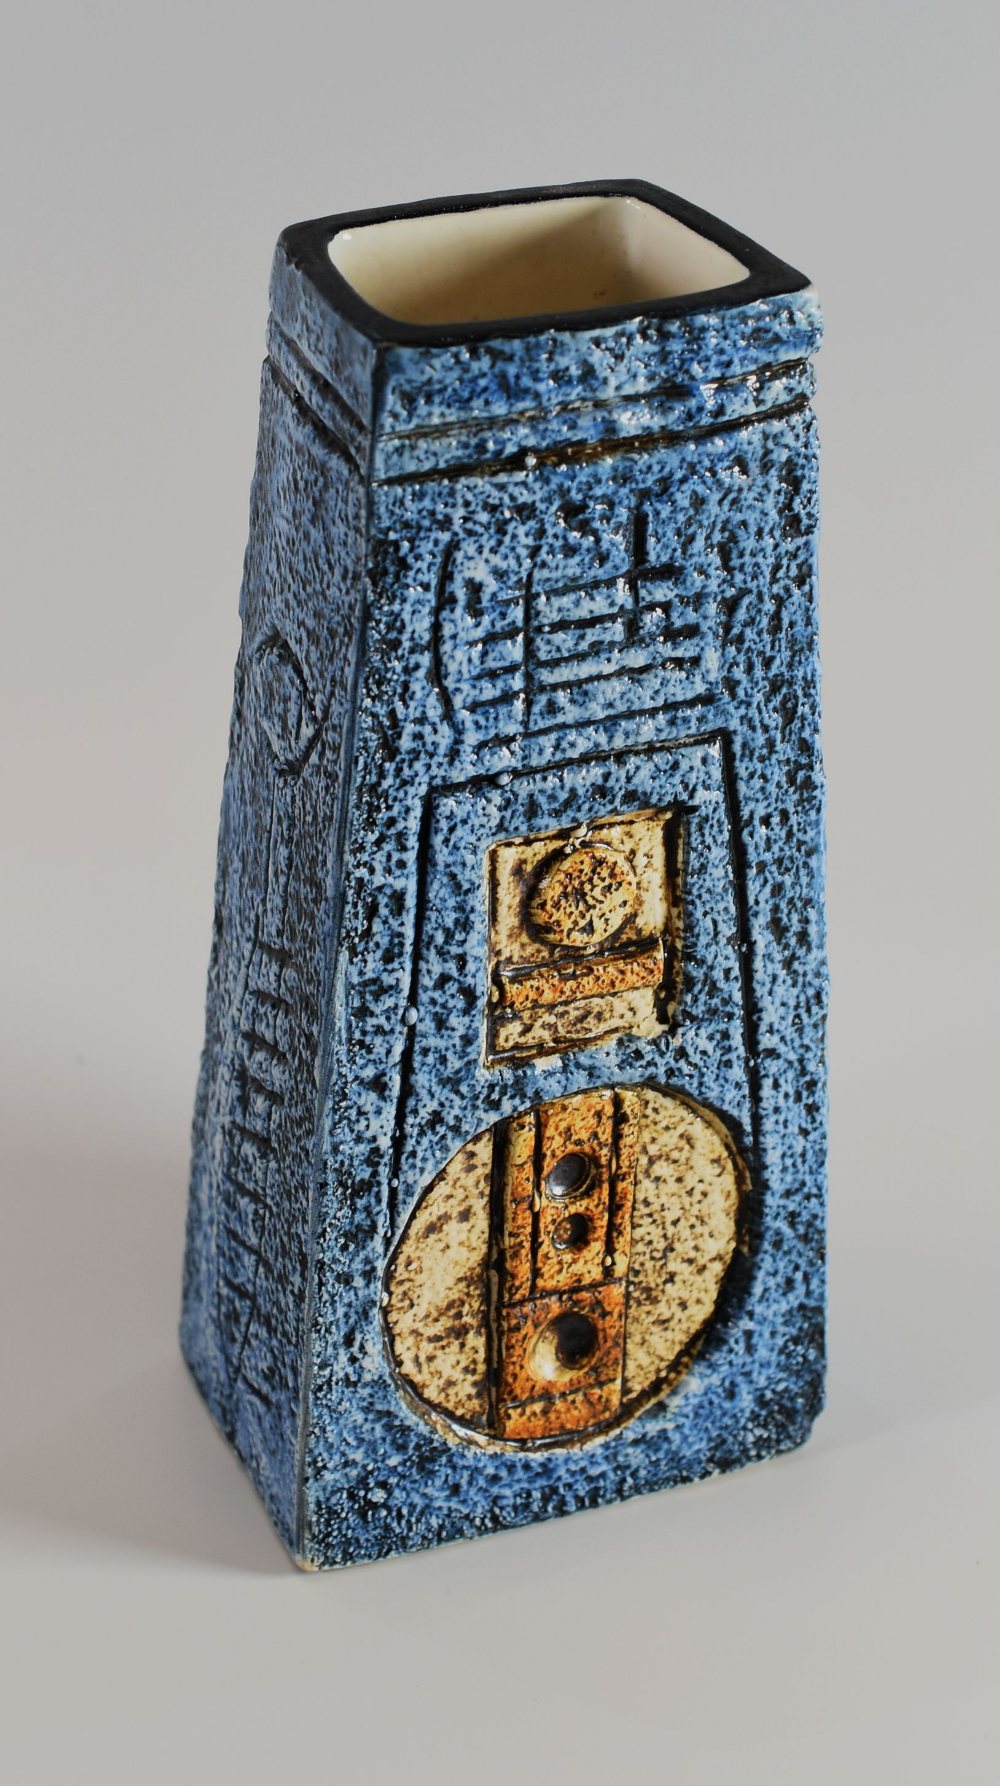 A TROIKA SLAB SIDED TAPERED COFFIN-VASE typically decorated with mottled blue and brown glaze,